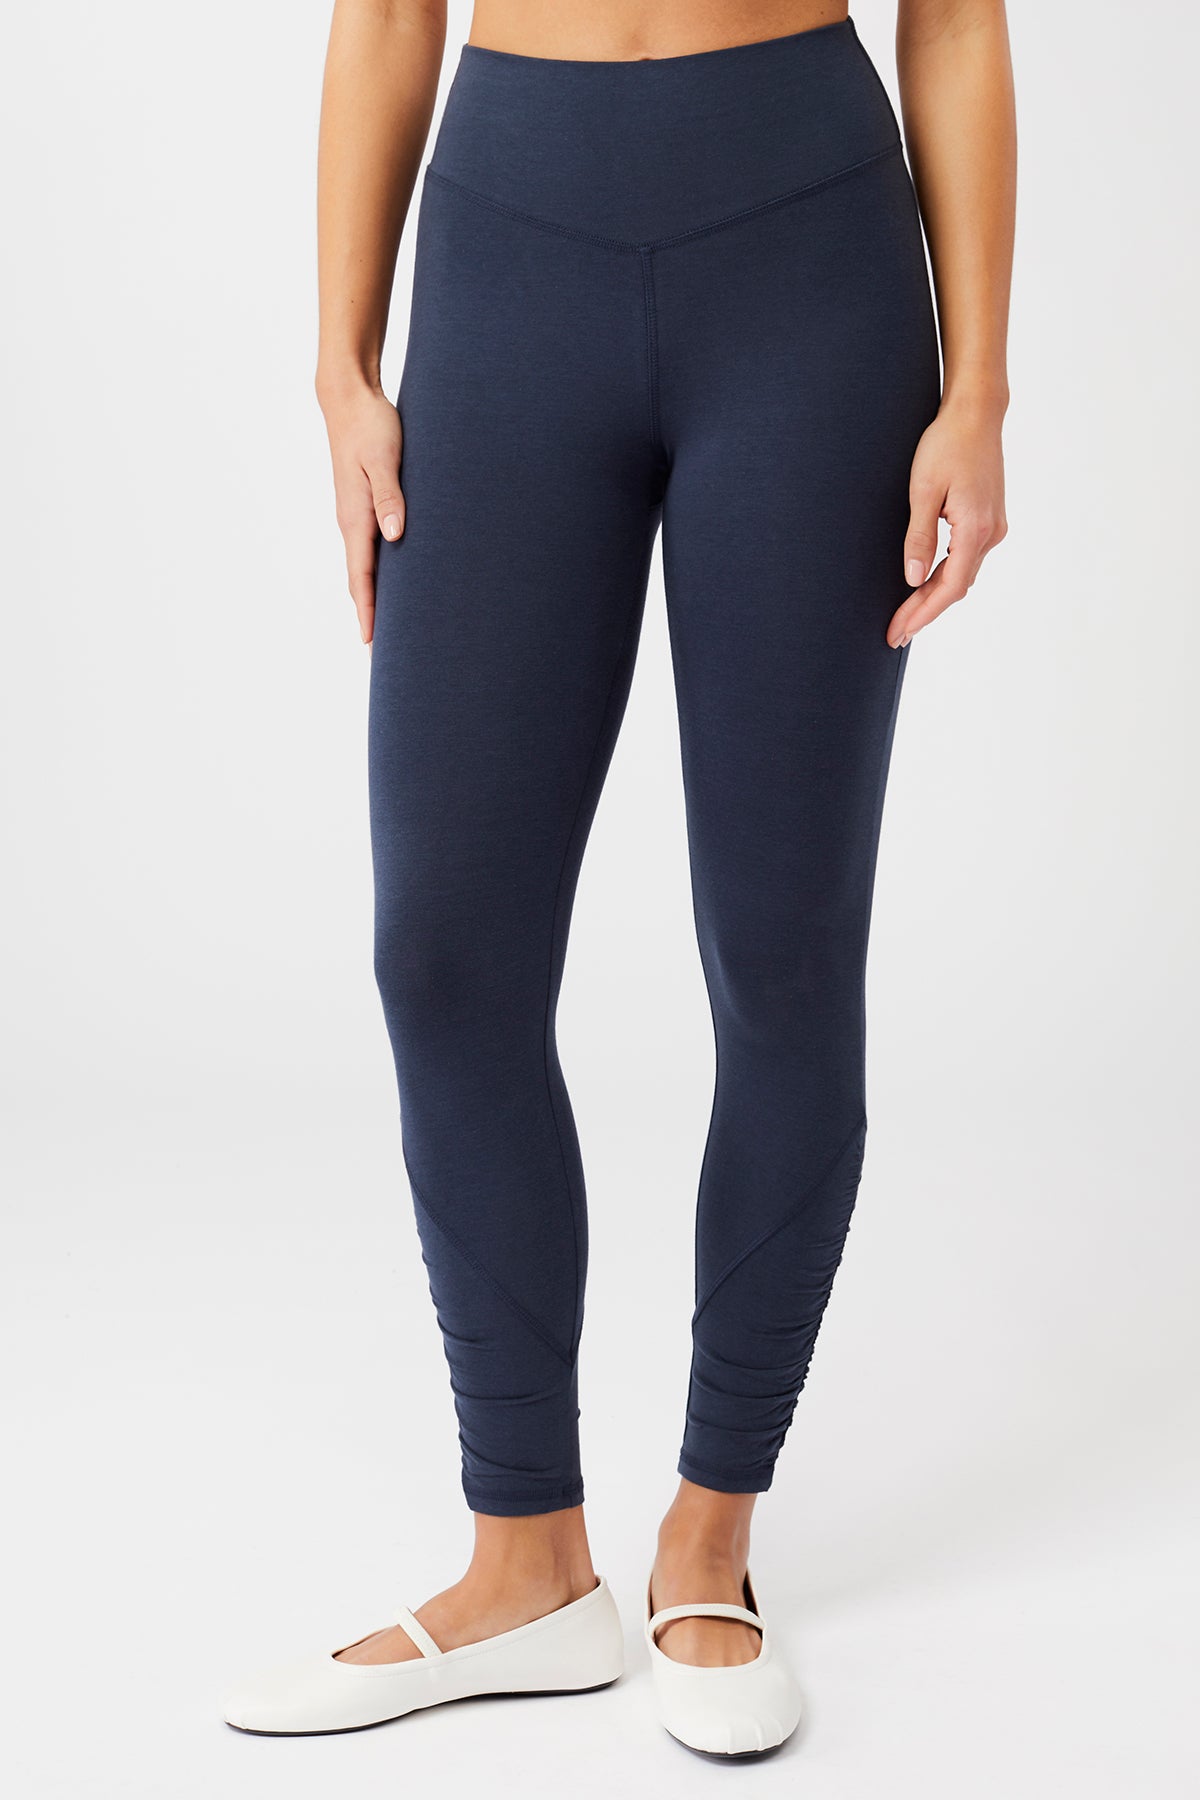 Eco Yoga Leggings with perfect fit